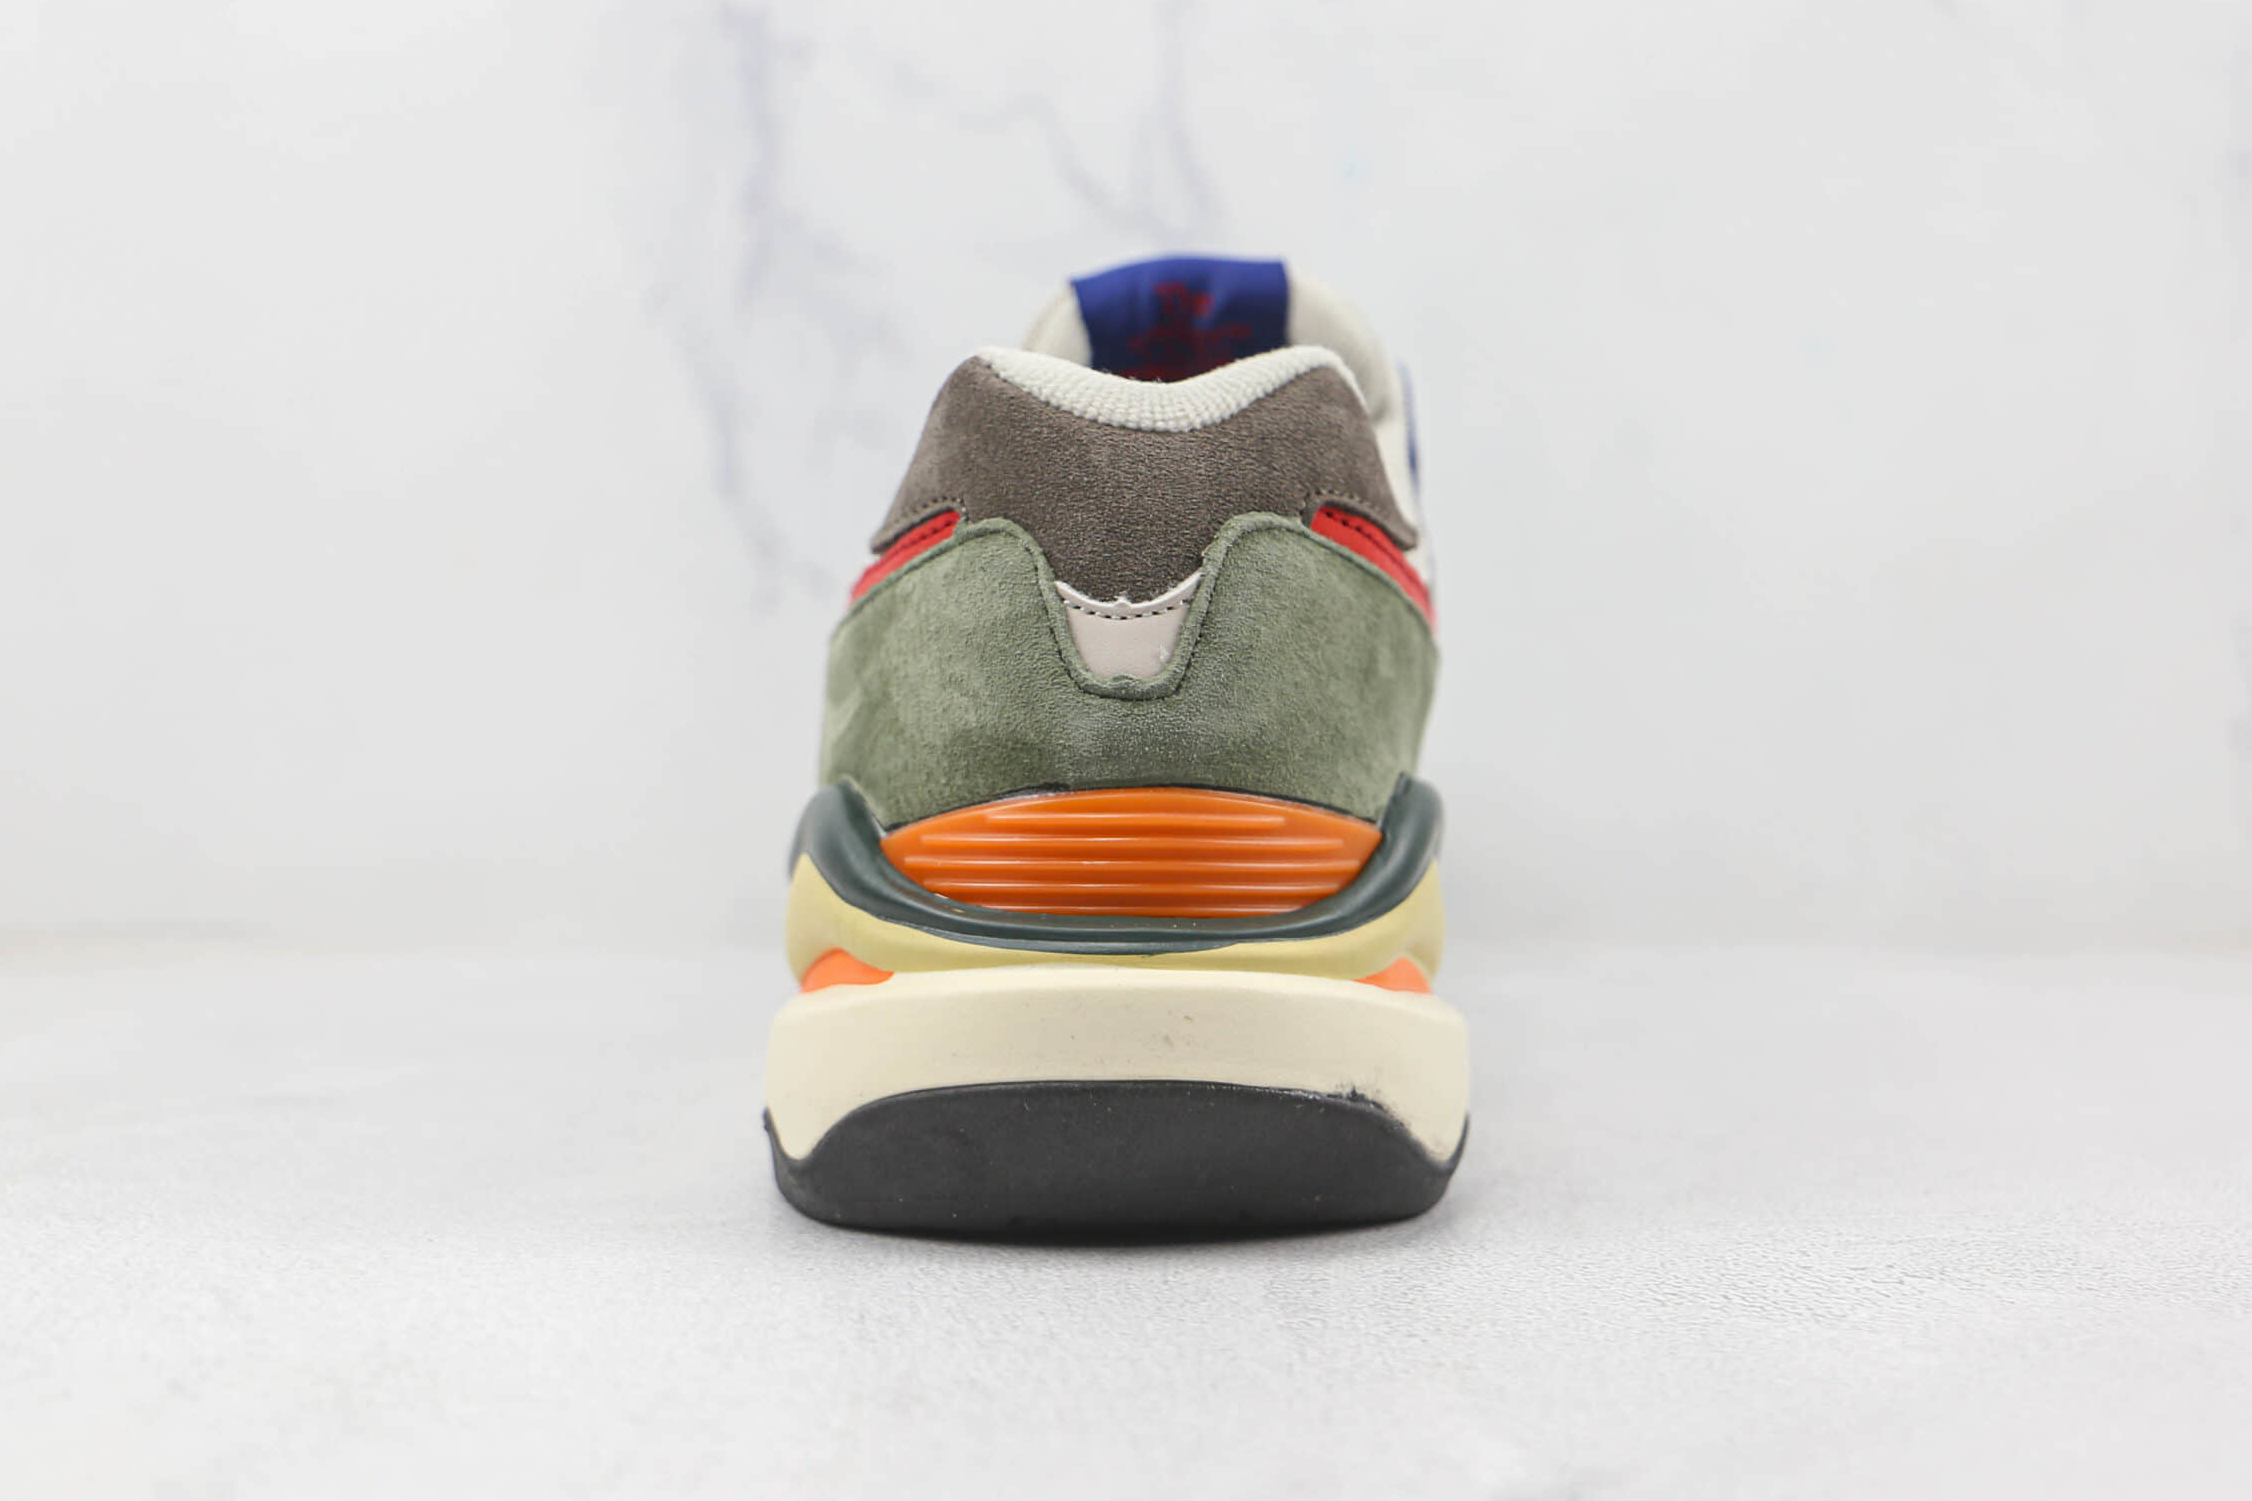 New Balance 5740FY1 Light Cliff Grey Multi Sneaker | Limited Edition